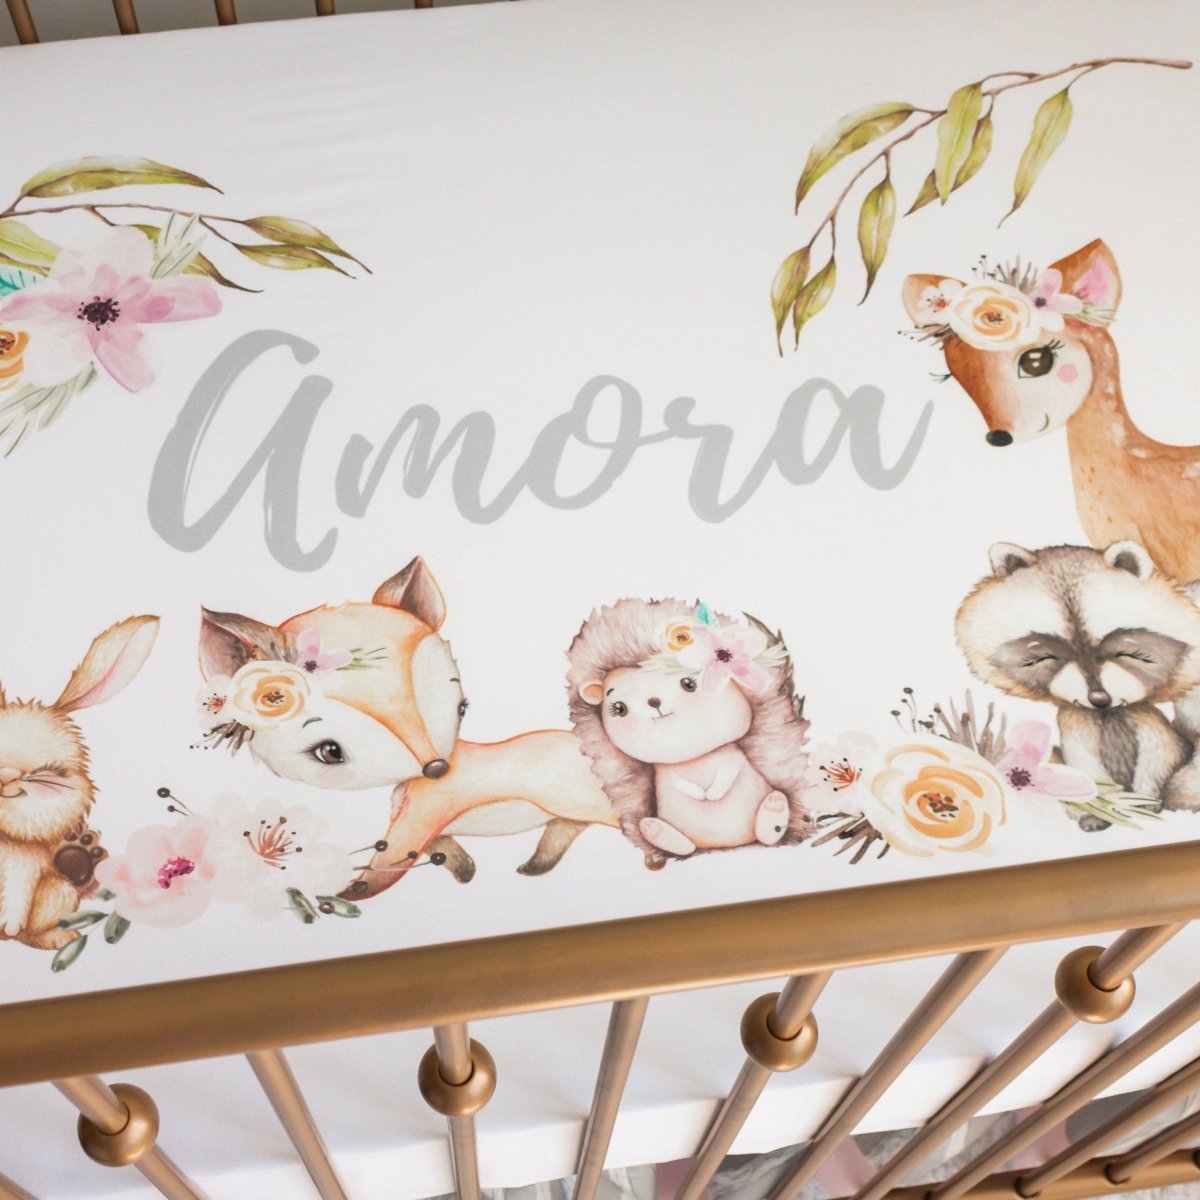 Floral Woodlands Personalized Crib Sheet - gender_girl, Personalized_Yes, text